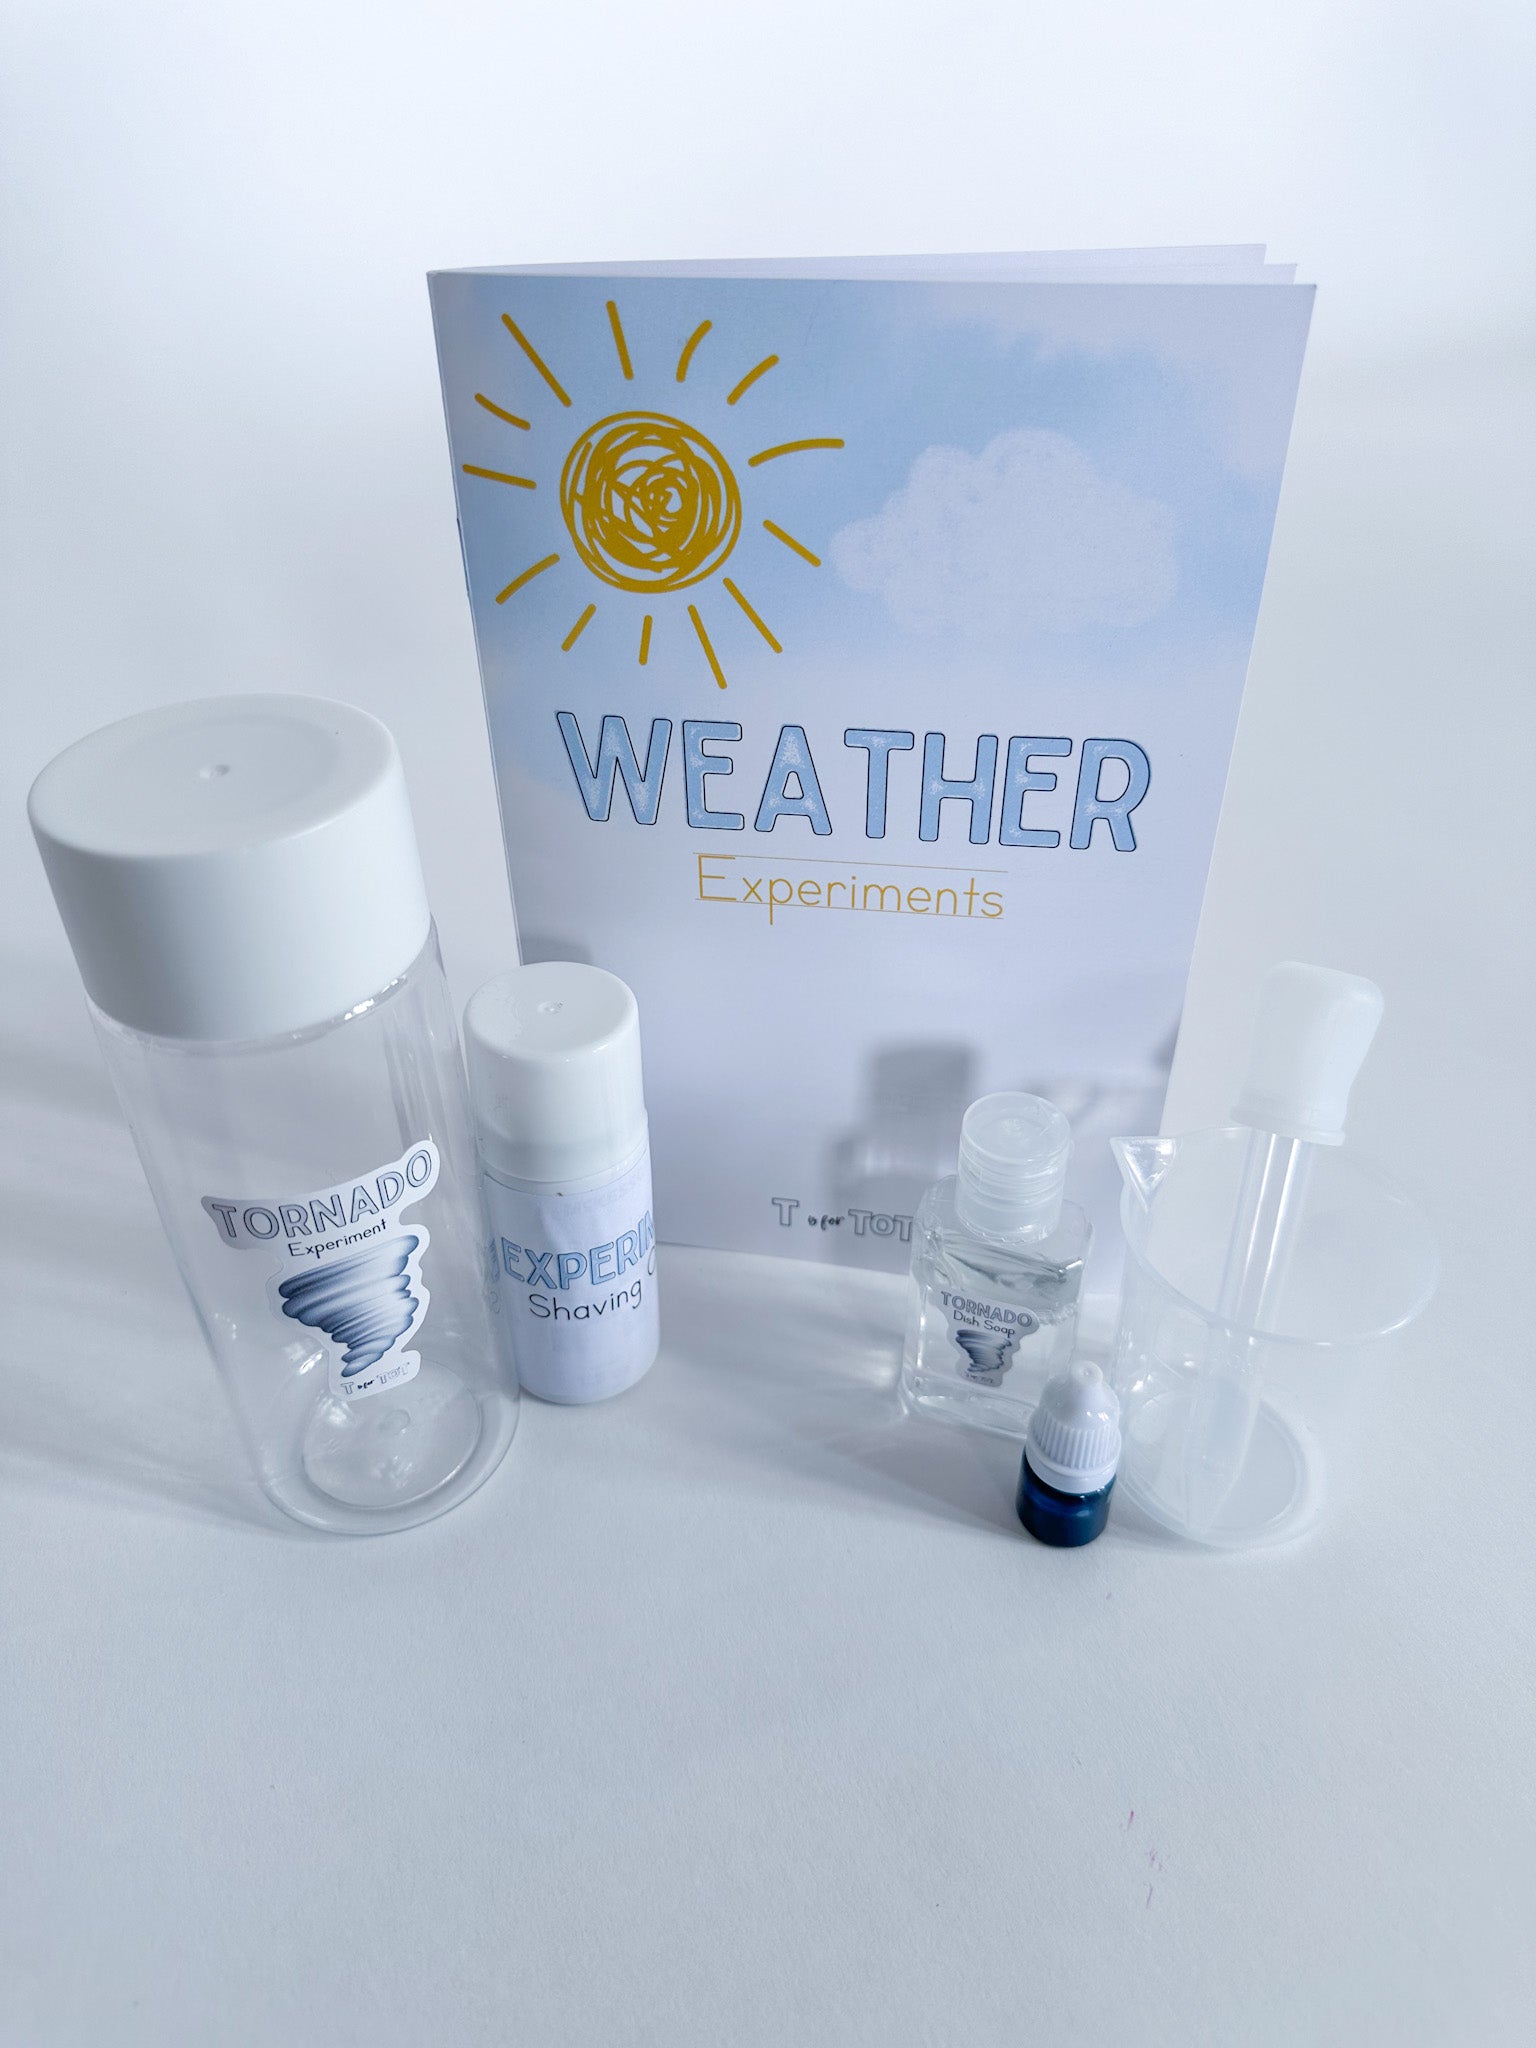 The Weather Kit